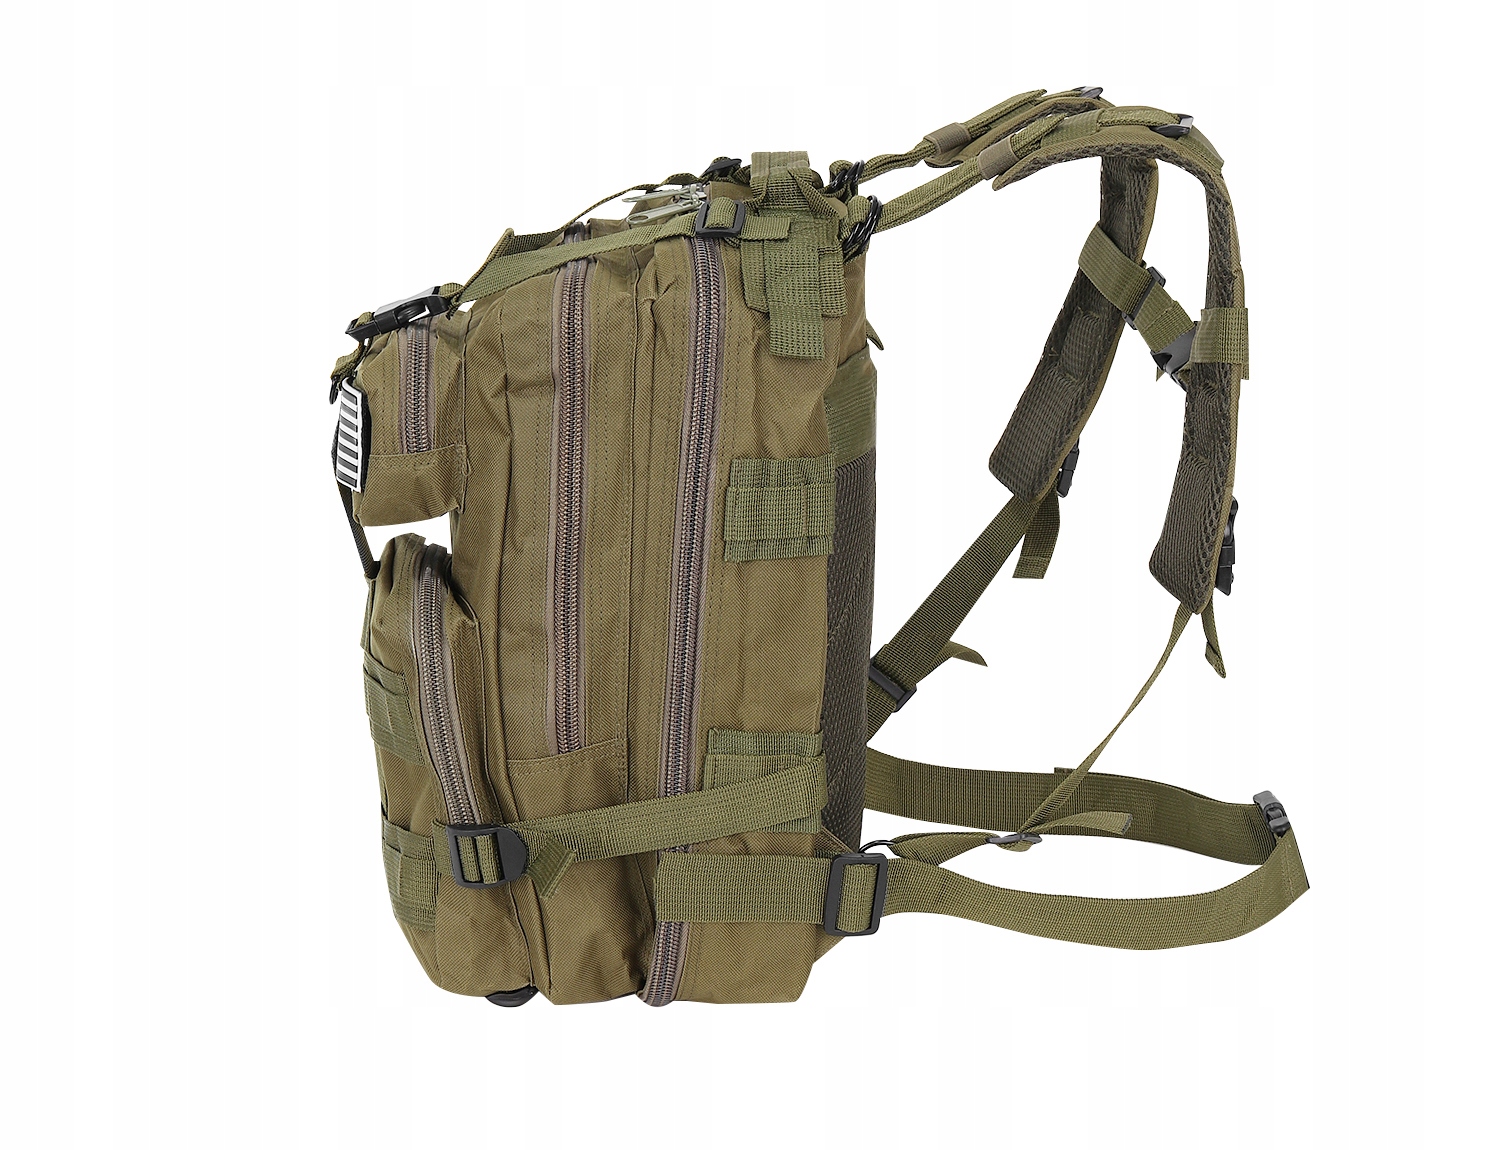 Military Tactical Military Survival Batoh 30l značky Iso Trade